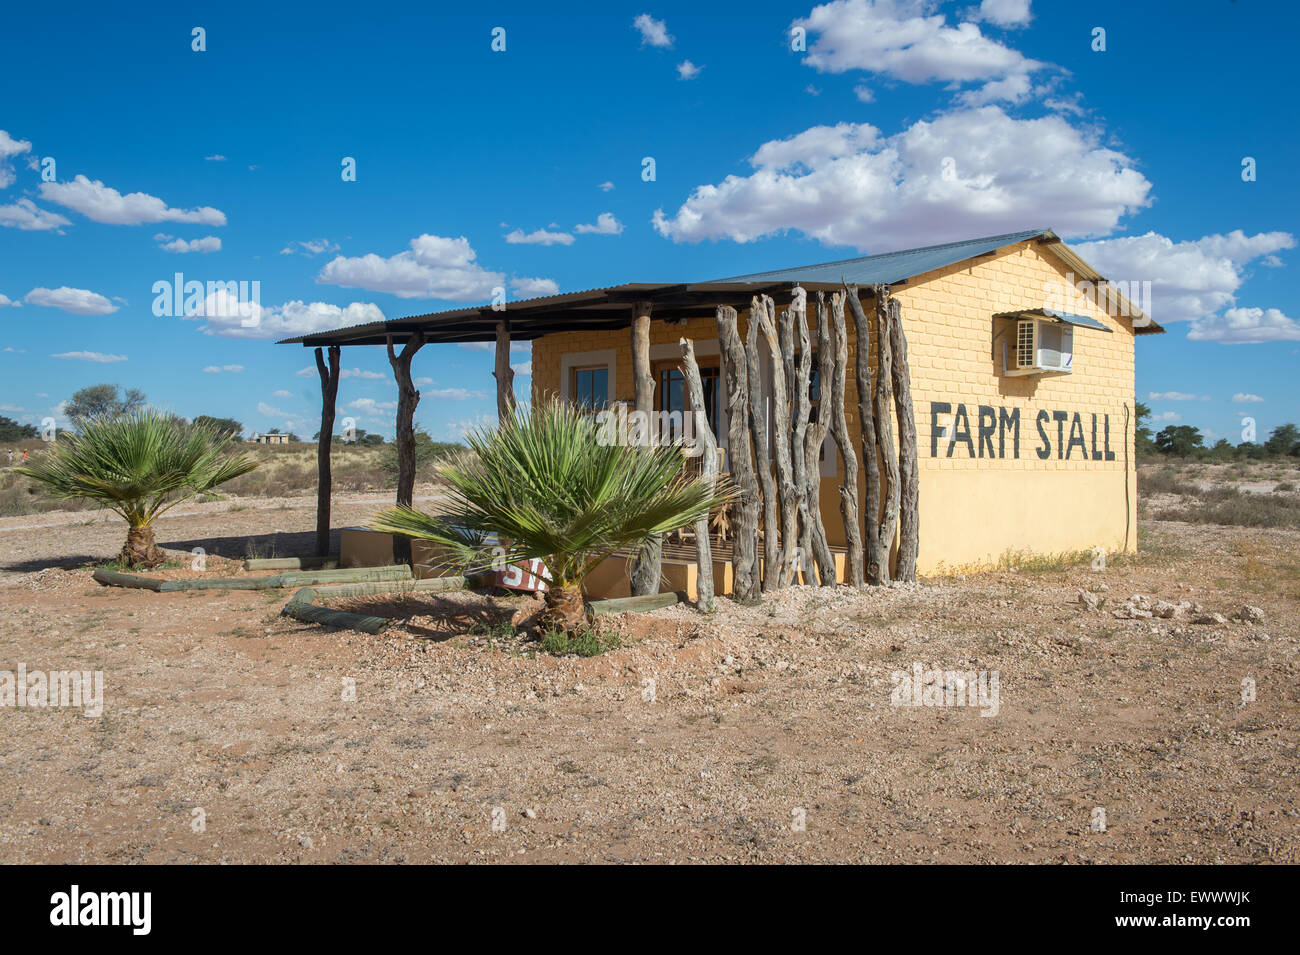 Namibia - Small farm stall building in desert. Stock Photo